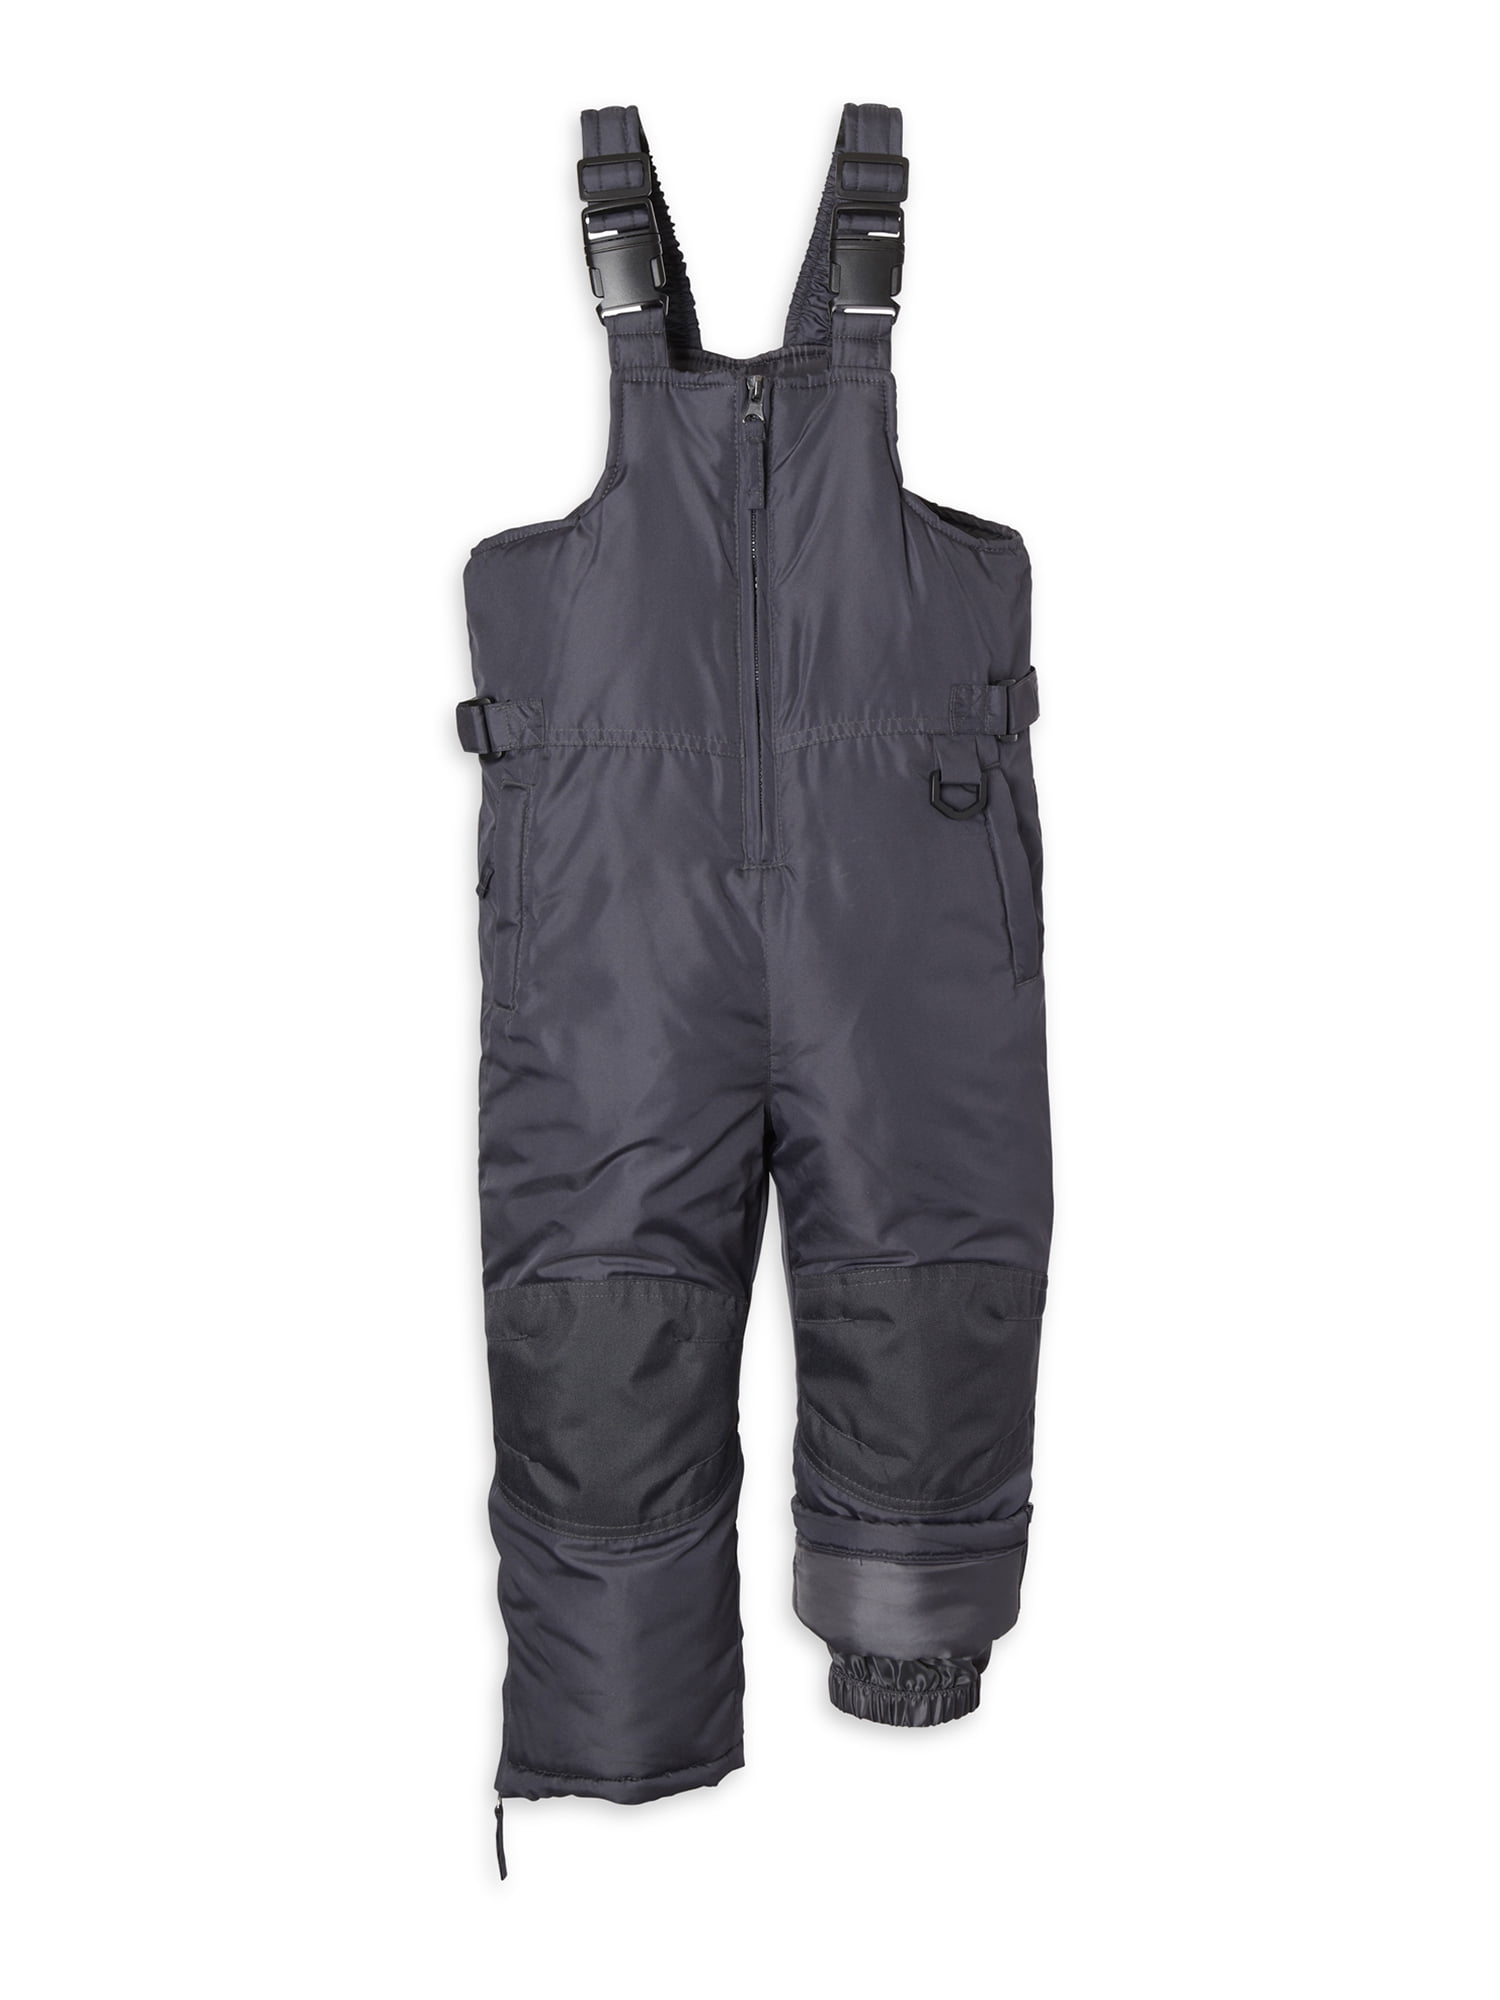  Cherokee Kids' Snow Bib – Boys and Girls Insulated Ski Pants  Overalls (4-18), Size 4, Grey : Clothing, Shoes & Jewelry